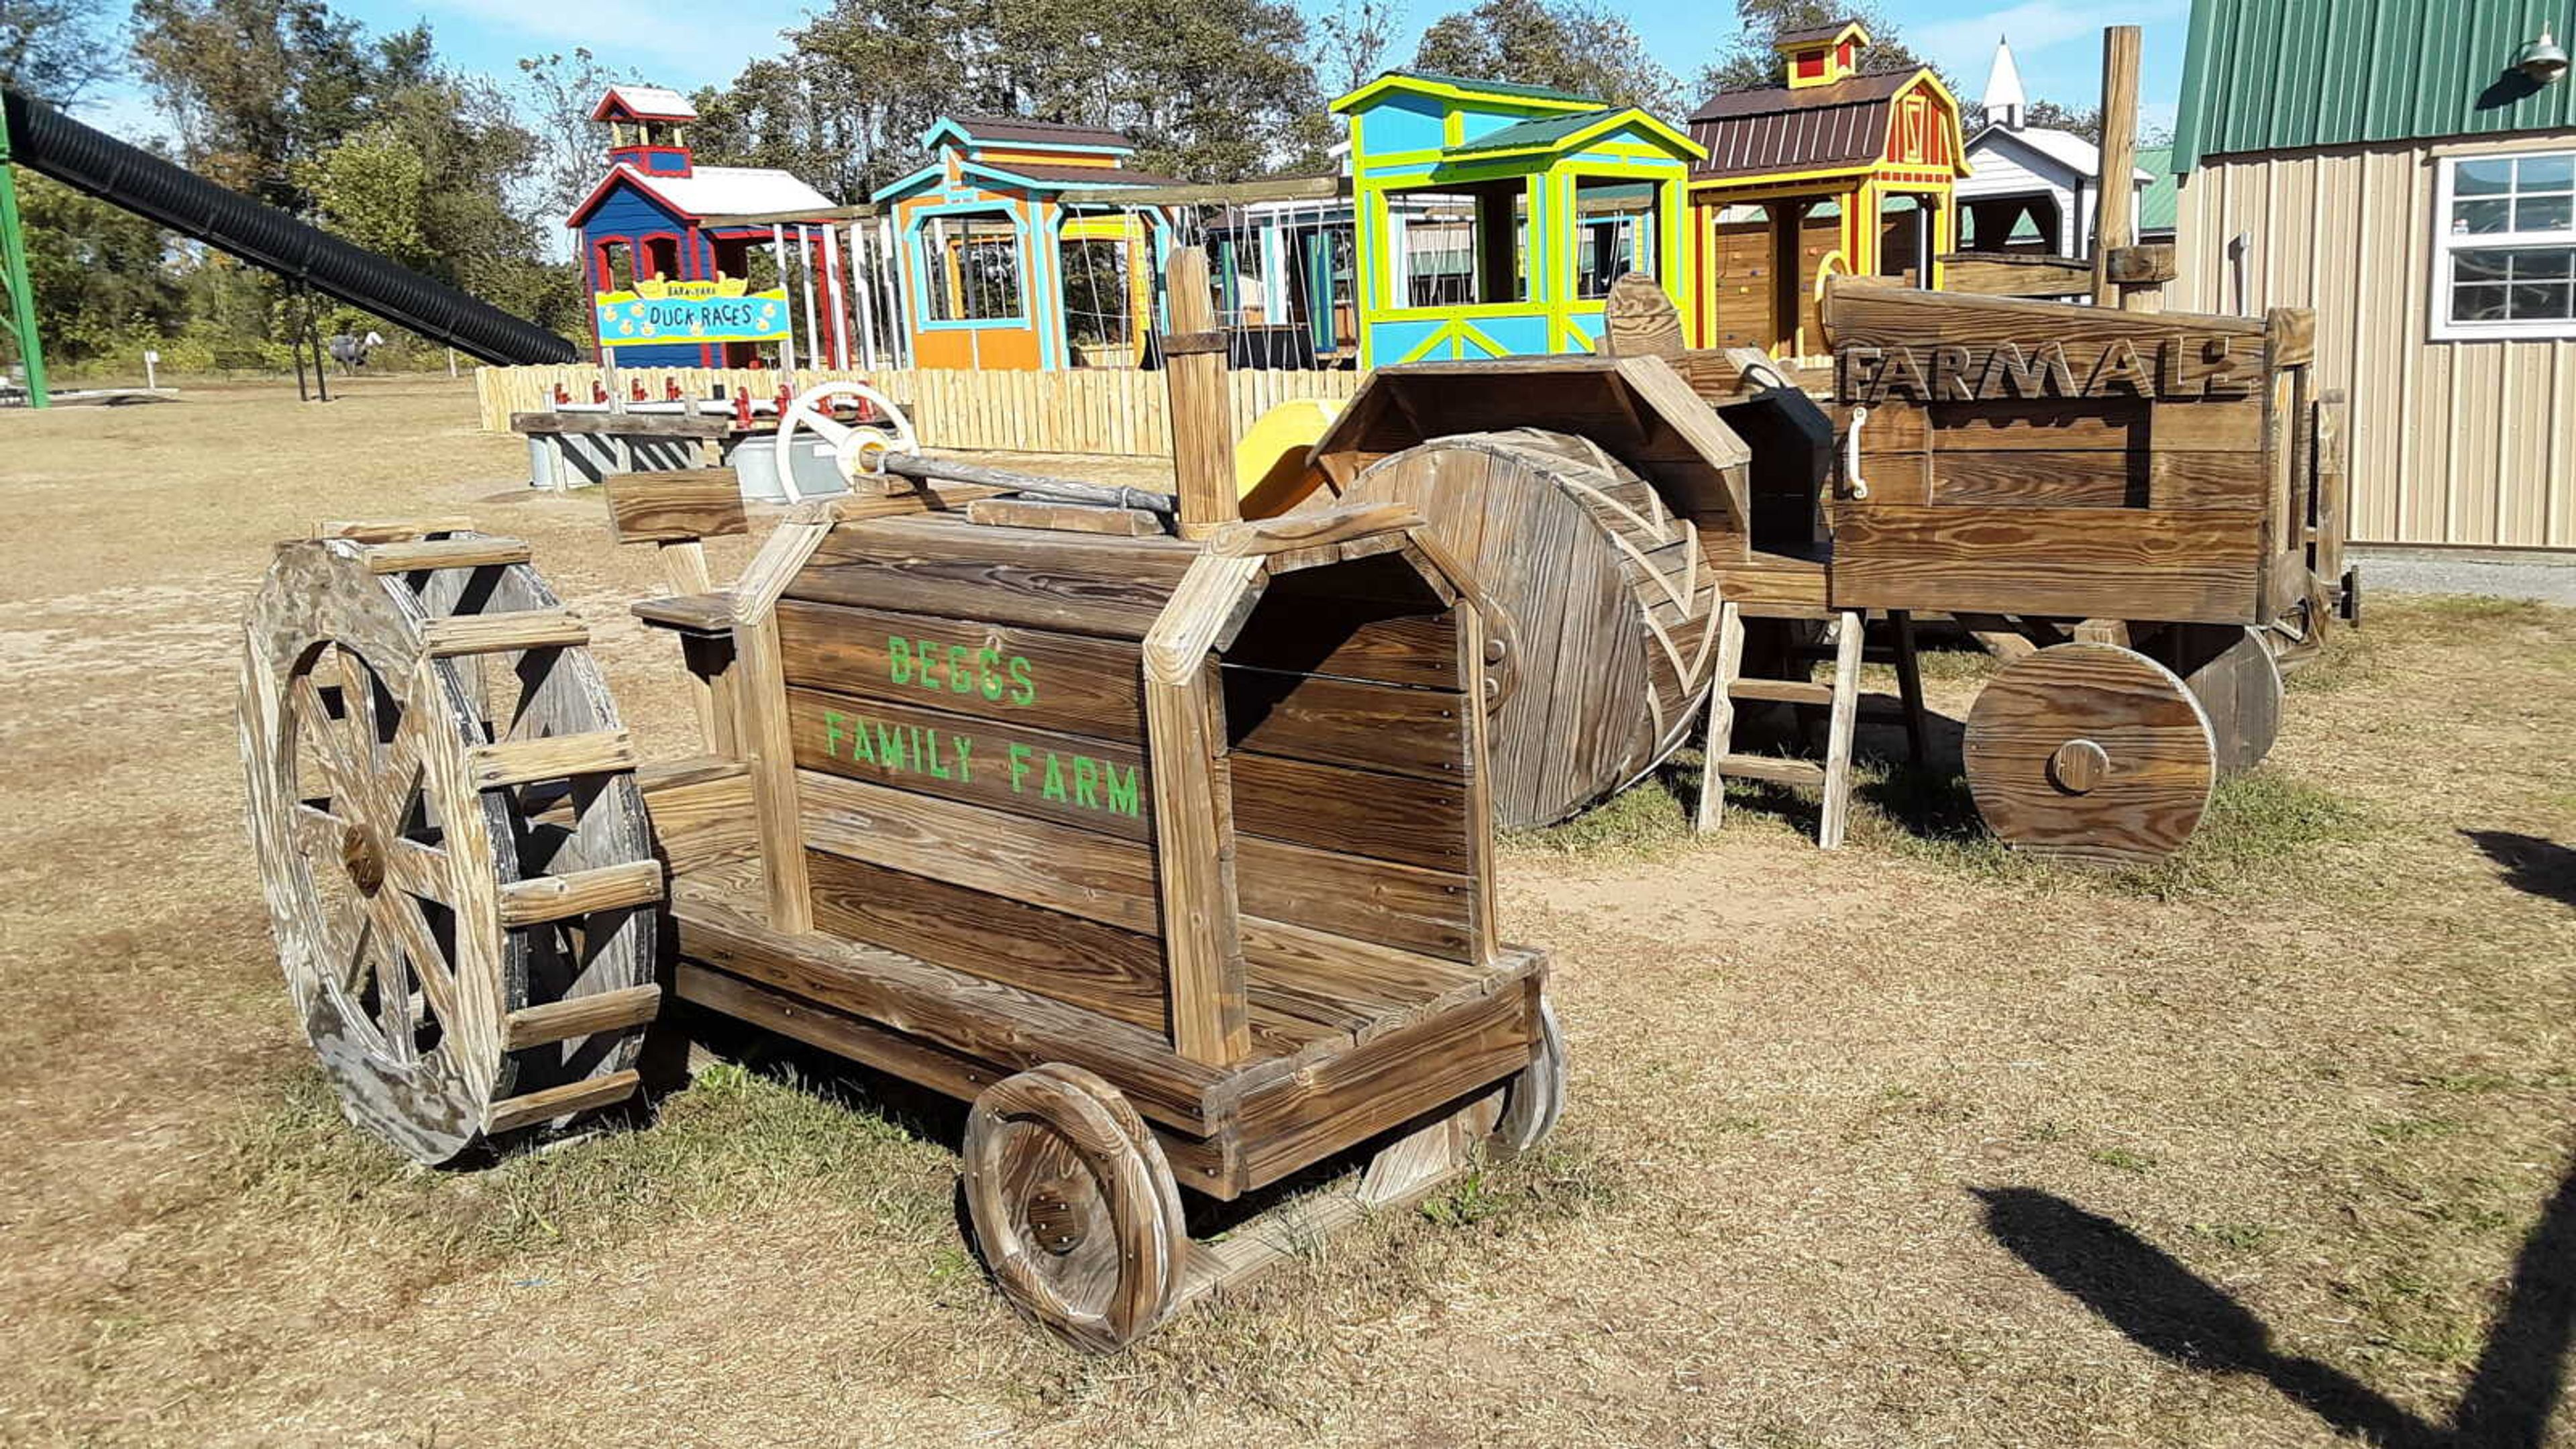 The farm has hit a lot of highs lately: coming to the end of its 20th year, celebrating its parent company’s anniversary and hitting a one-day record of 4,200 attendees. The Beggs' family says they try and add a new attraction each year.